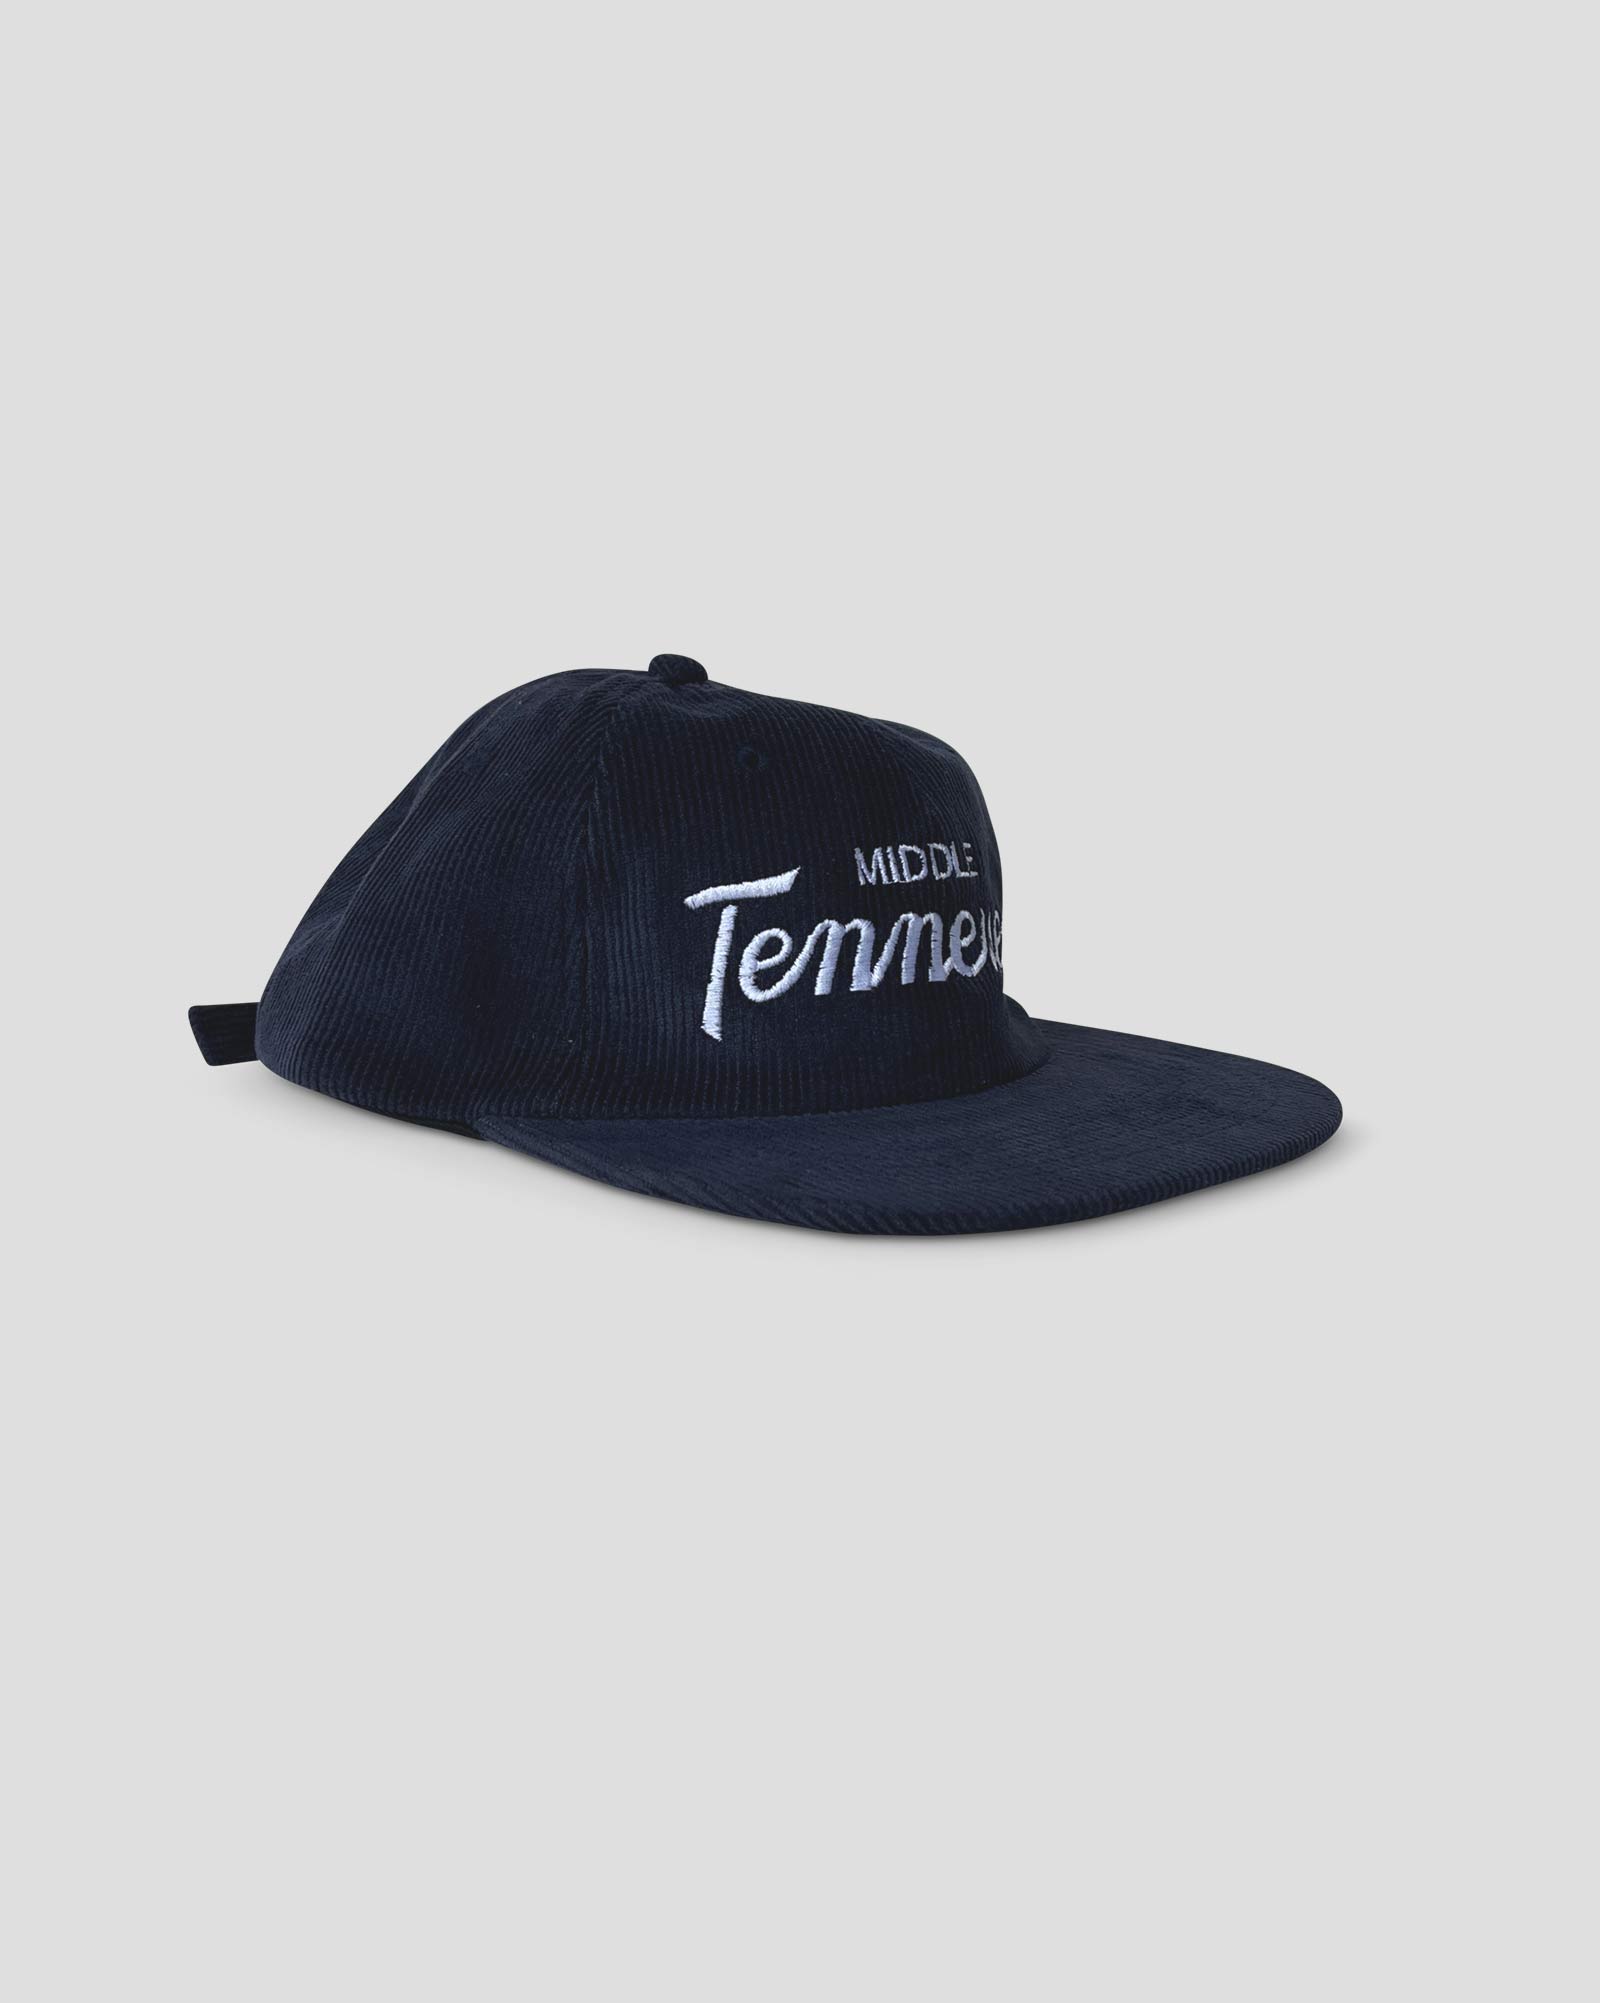 Middle Tennessee Vintage Corduroy Hat